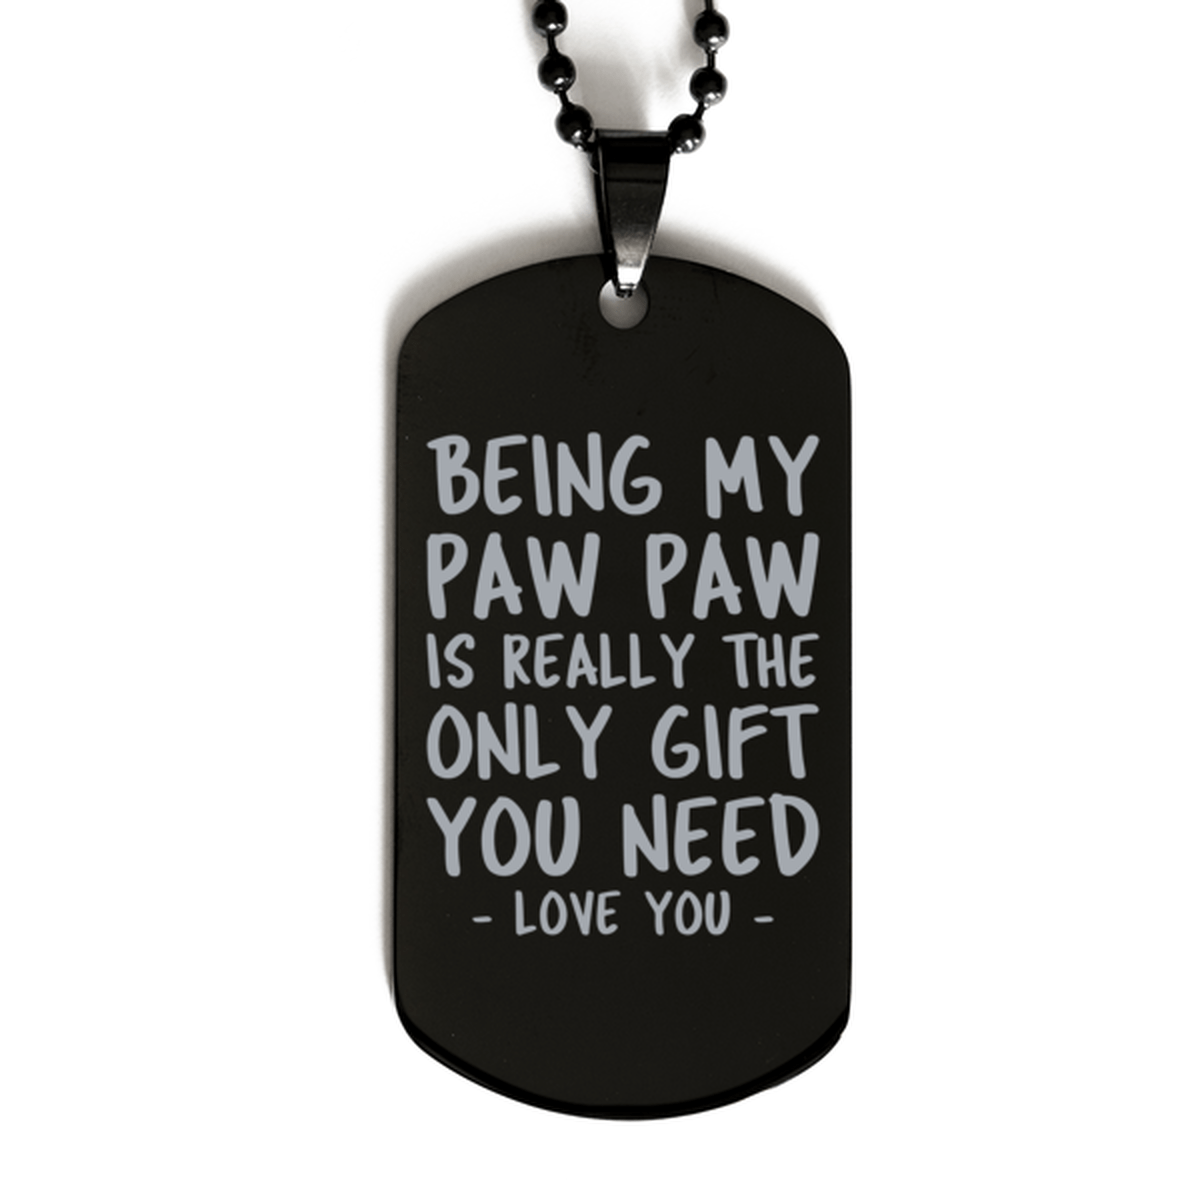 Funny Paw Paw Black Dog Tag Necklace, Being My Paw Paw Is Really the Only Gift You Need, Best Birthday Gifts for Paw Paw